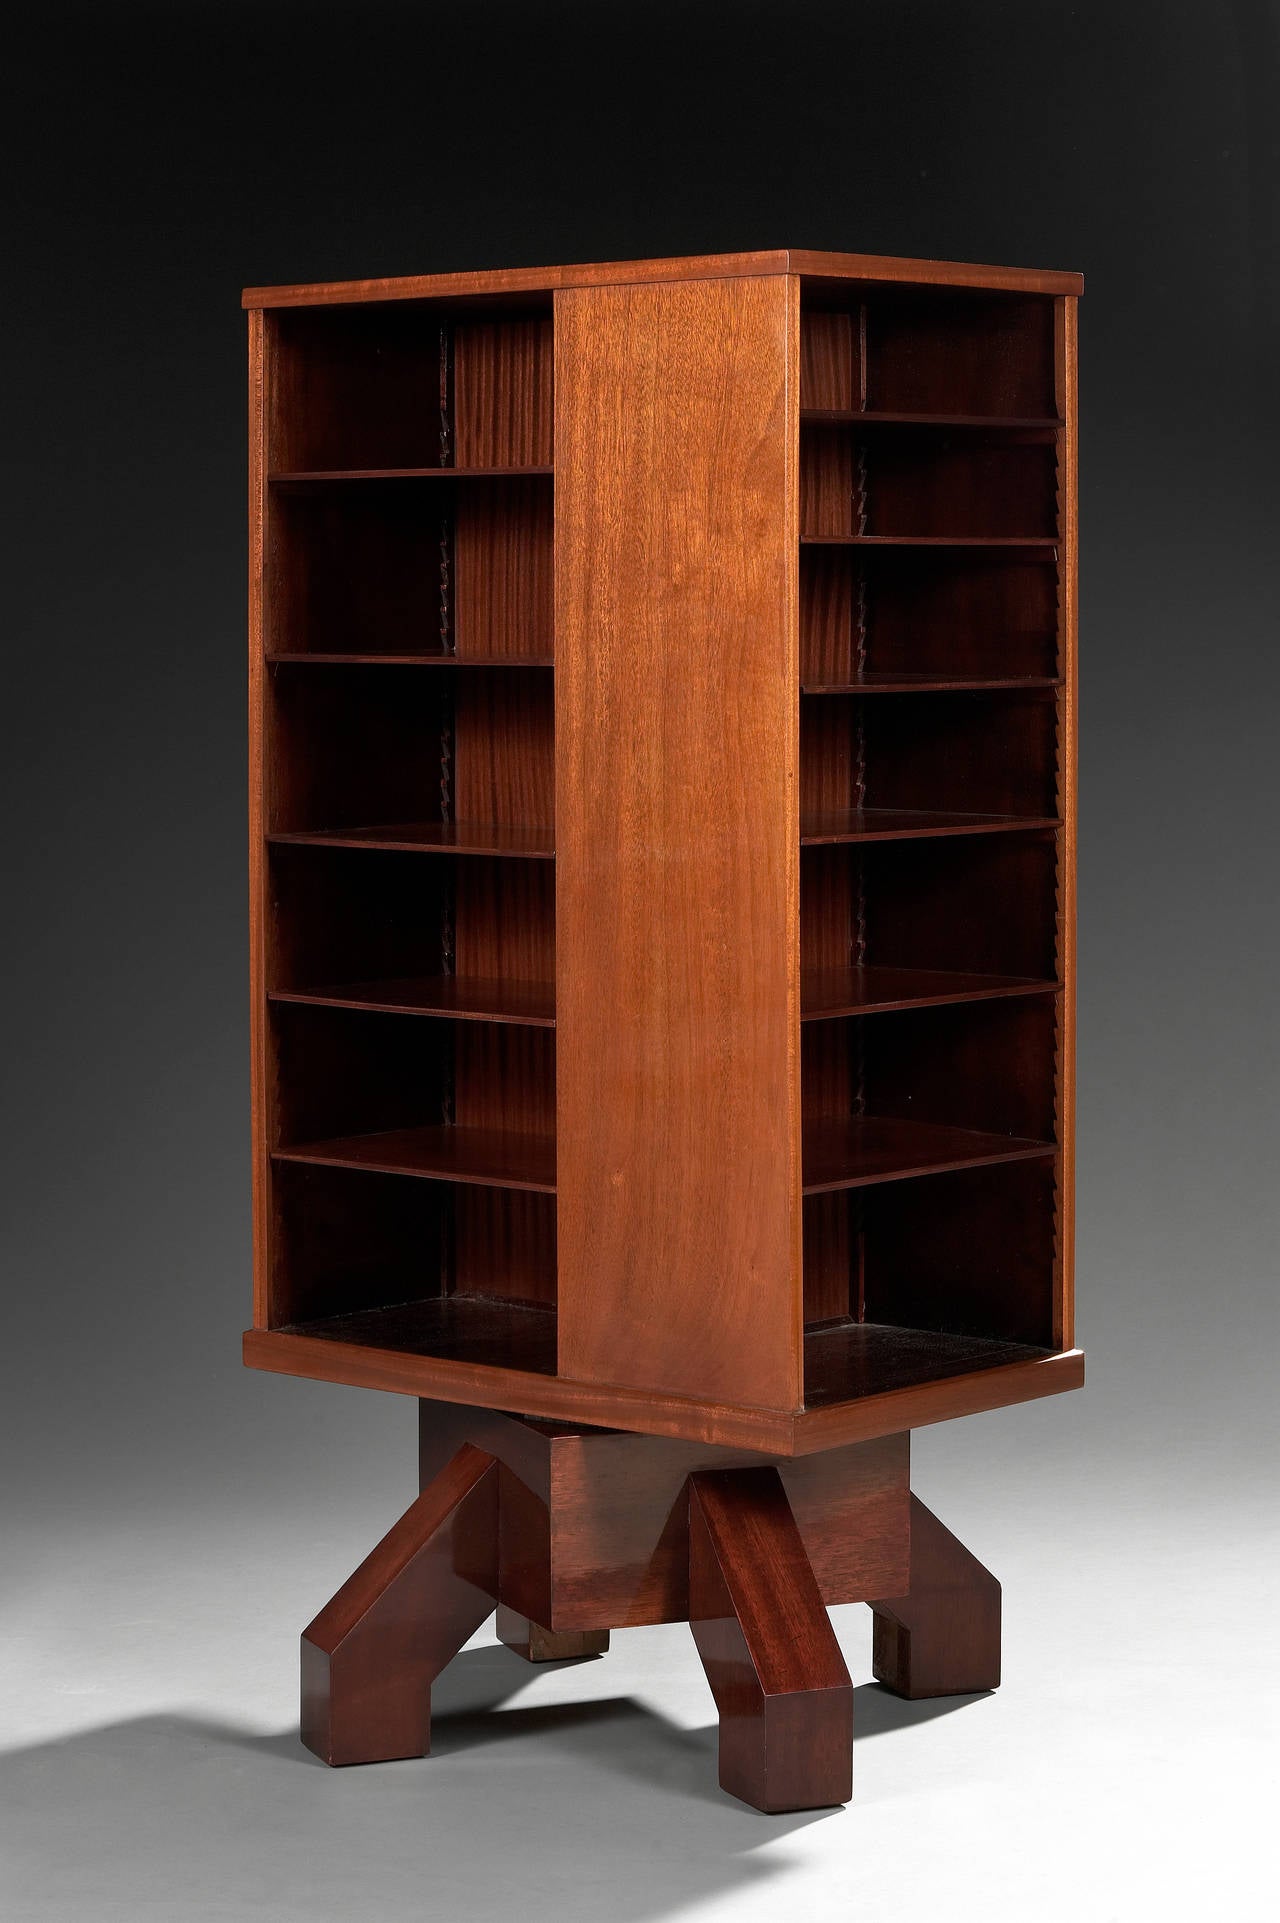 Mahogany seance bookcase with multiface quadrangular body and open shelves. One of them with a drawer. Four legs on square base.